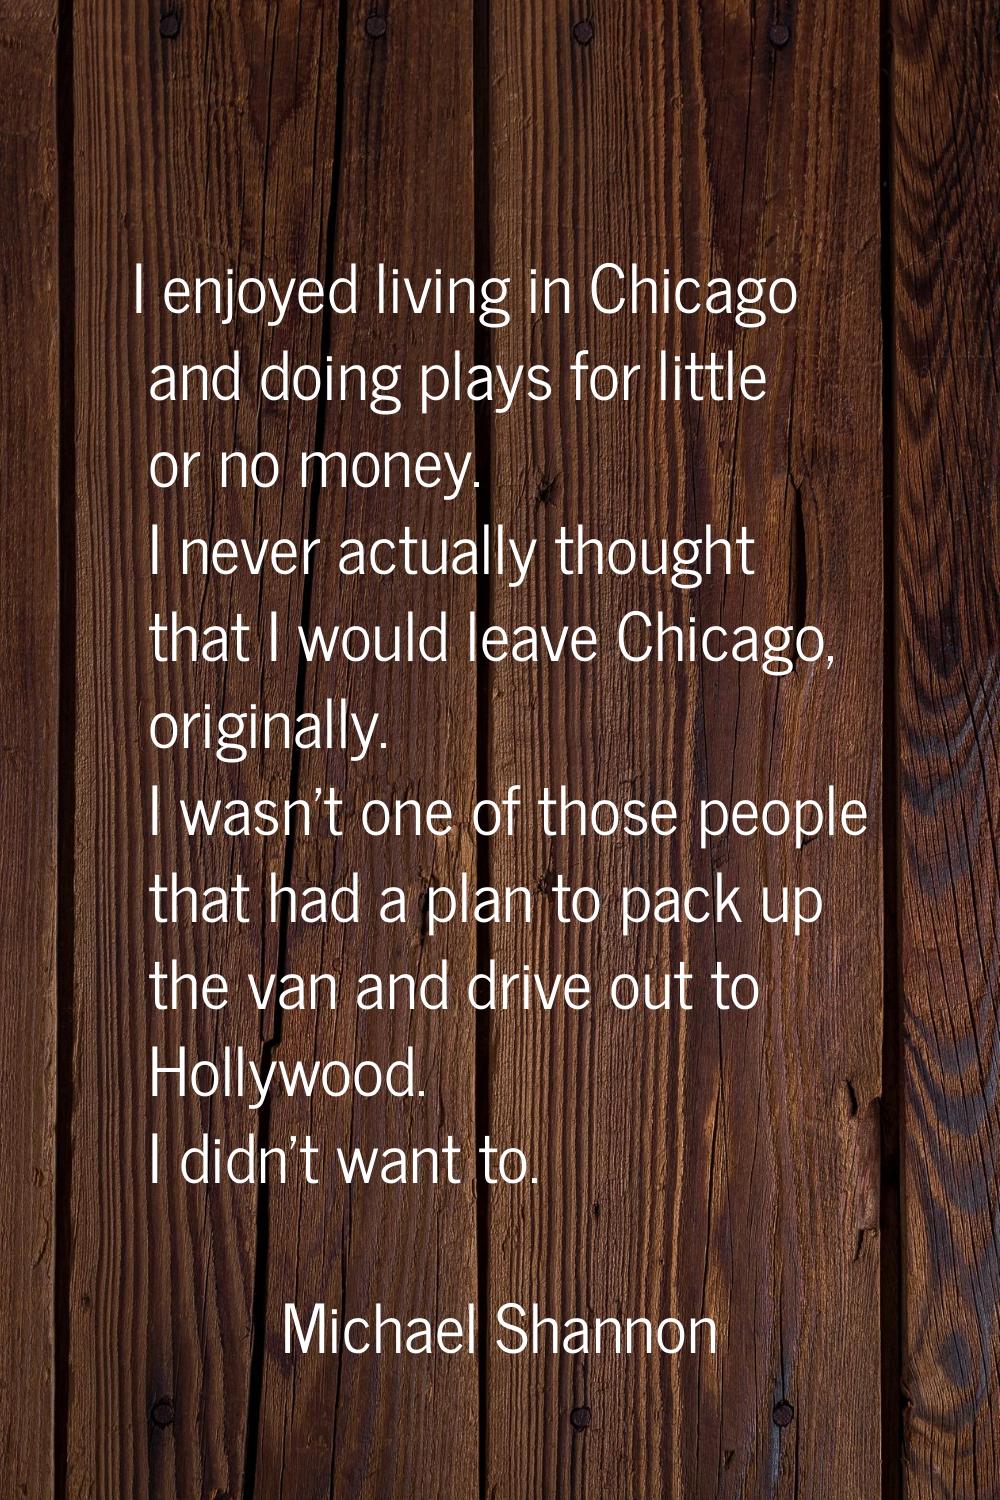 I enjoyed living in Chicago and doing plays for little or no money. I never actually thought that I